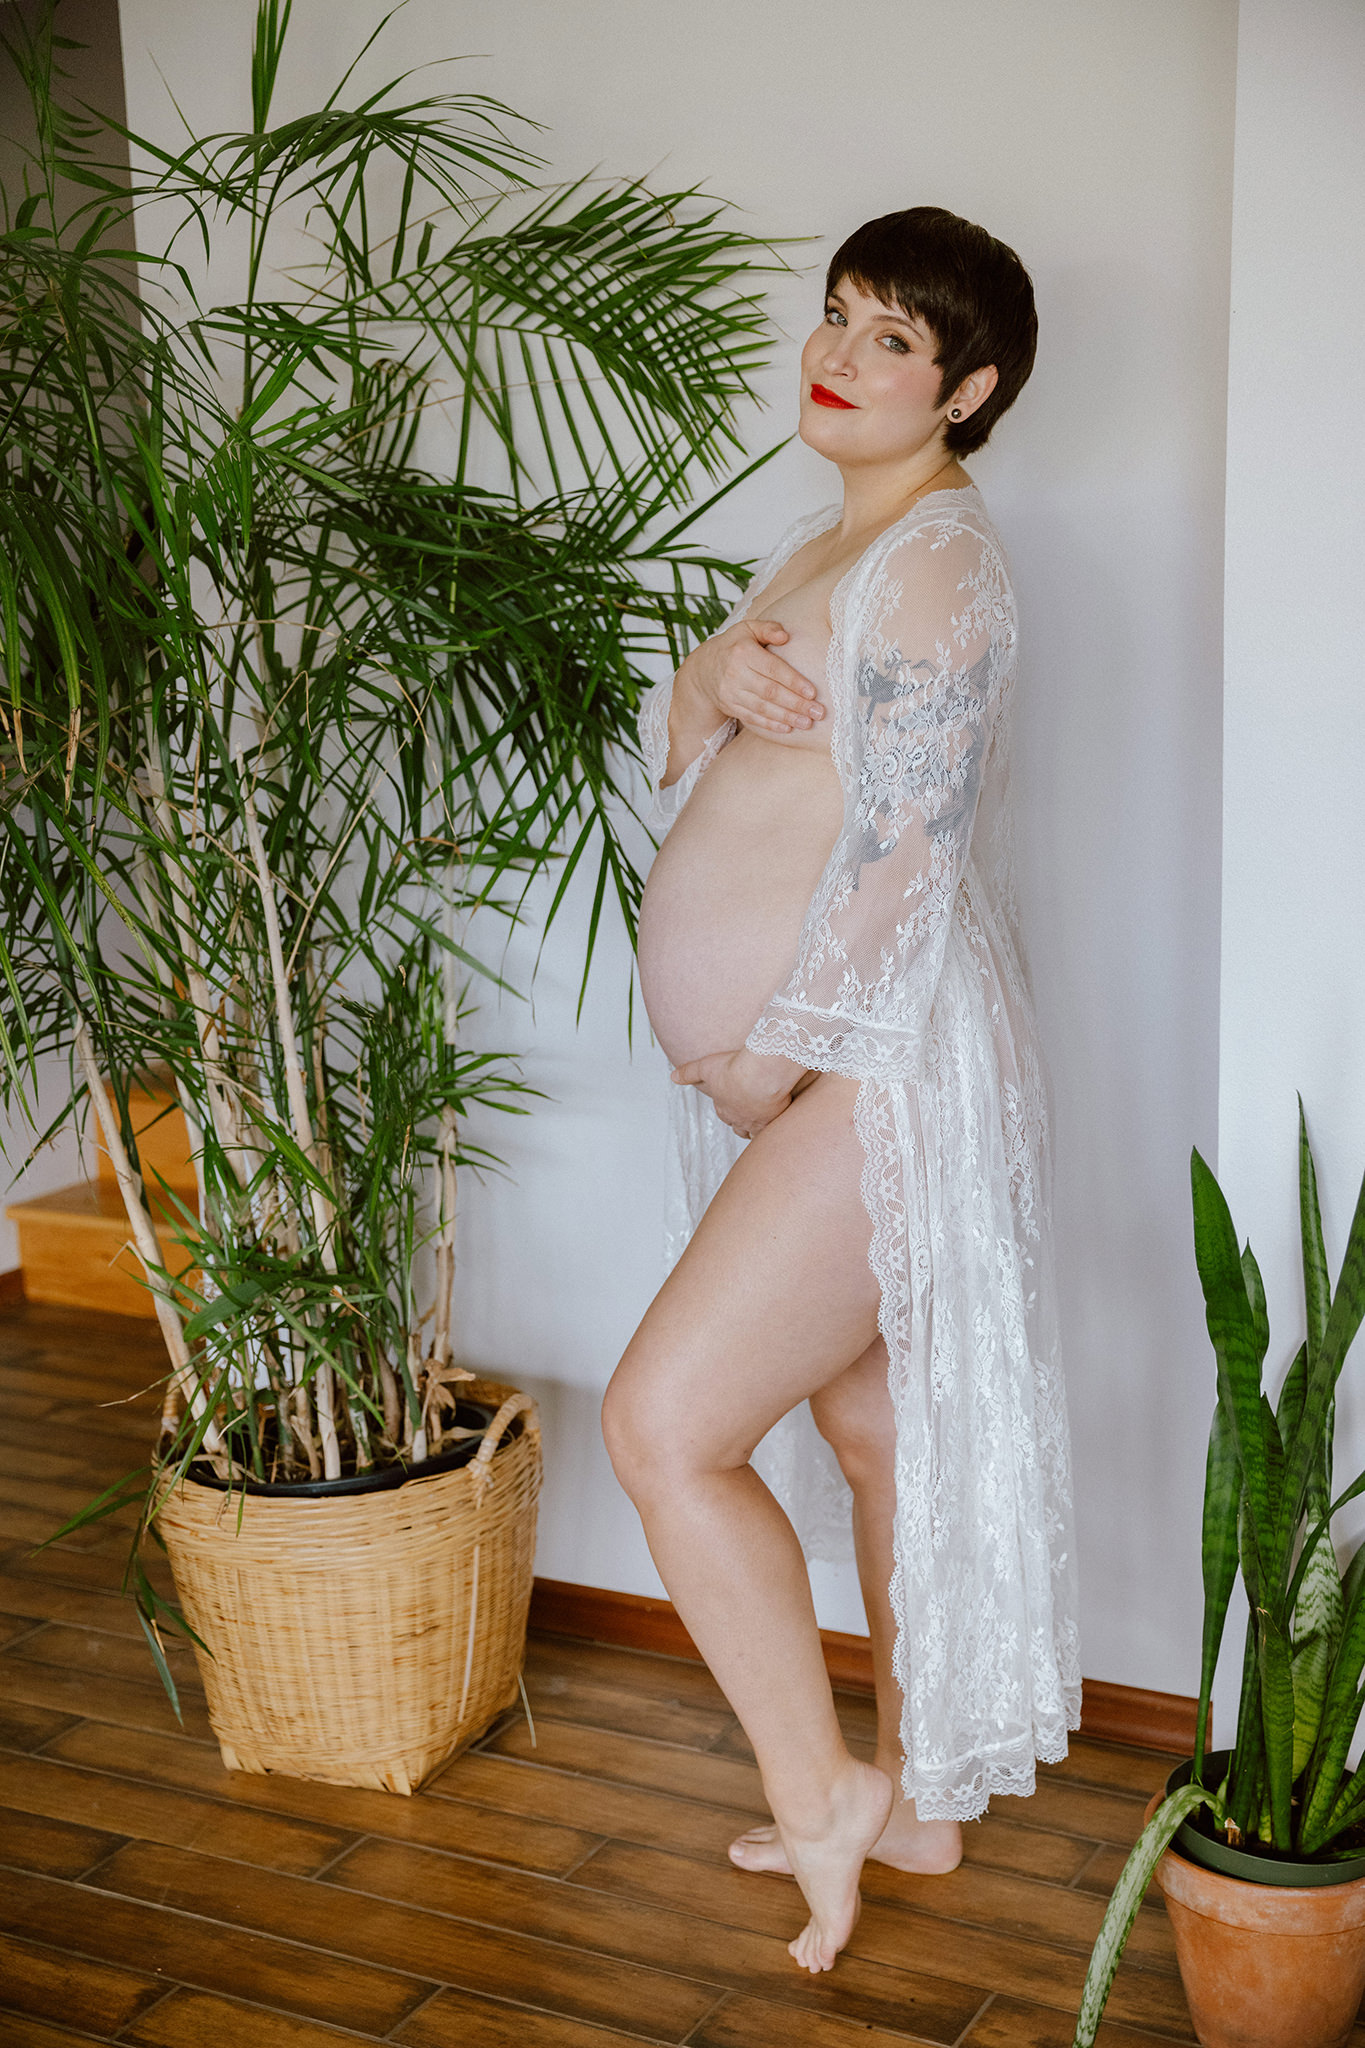 Sexy boudoir maternity photo in a lace robe with plants and natural light